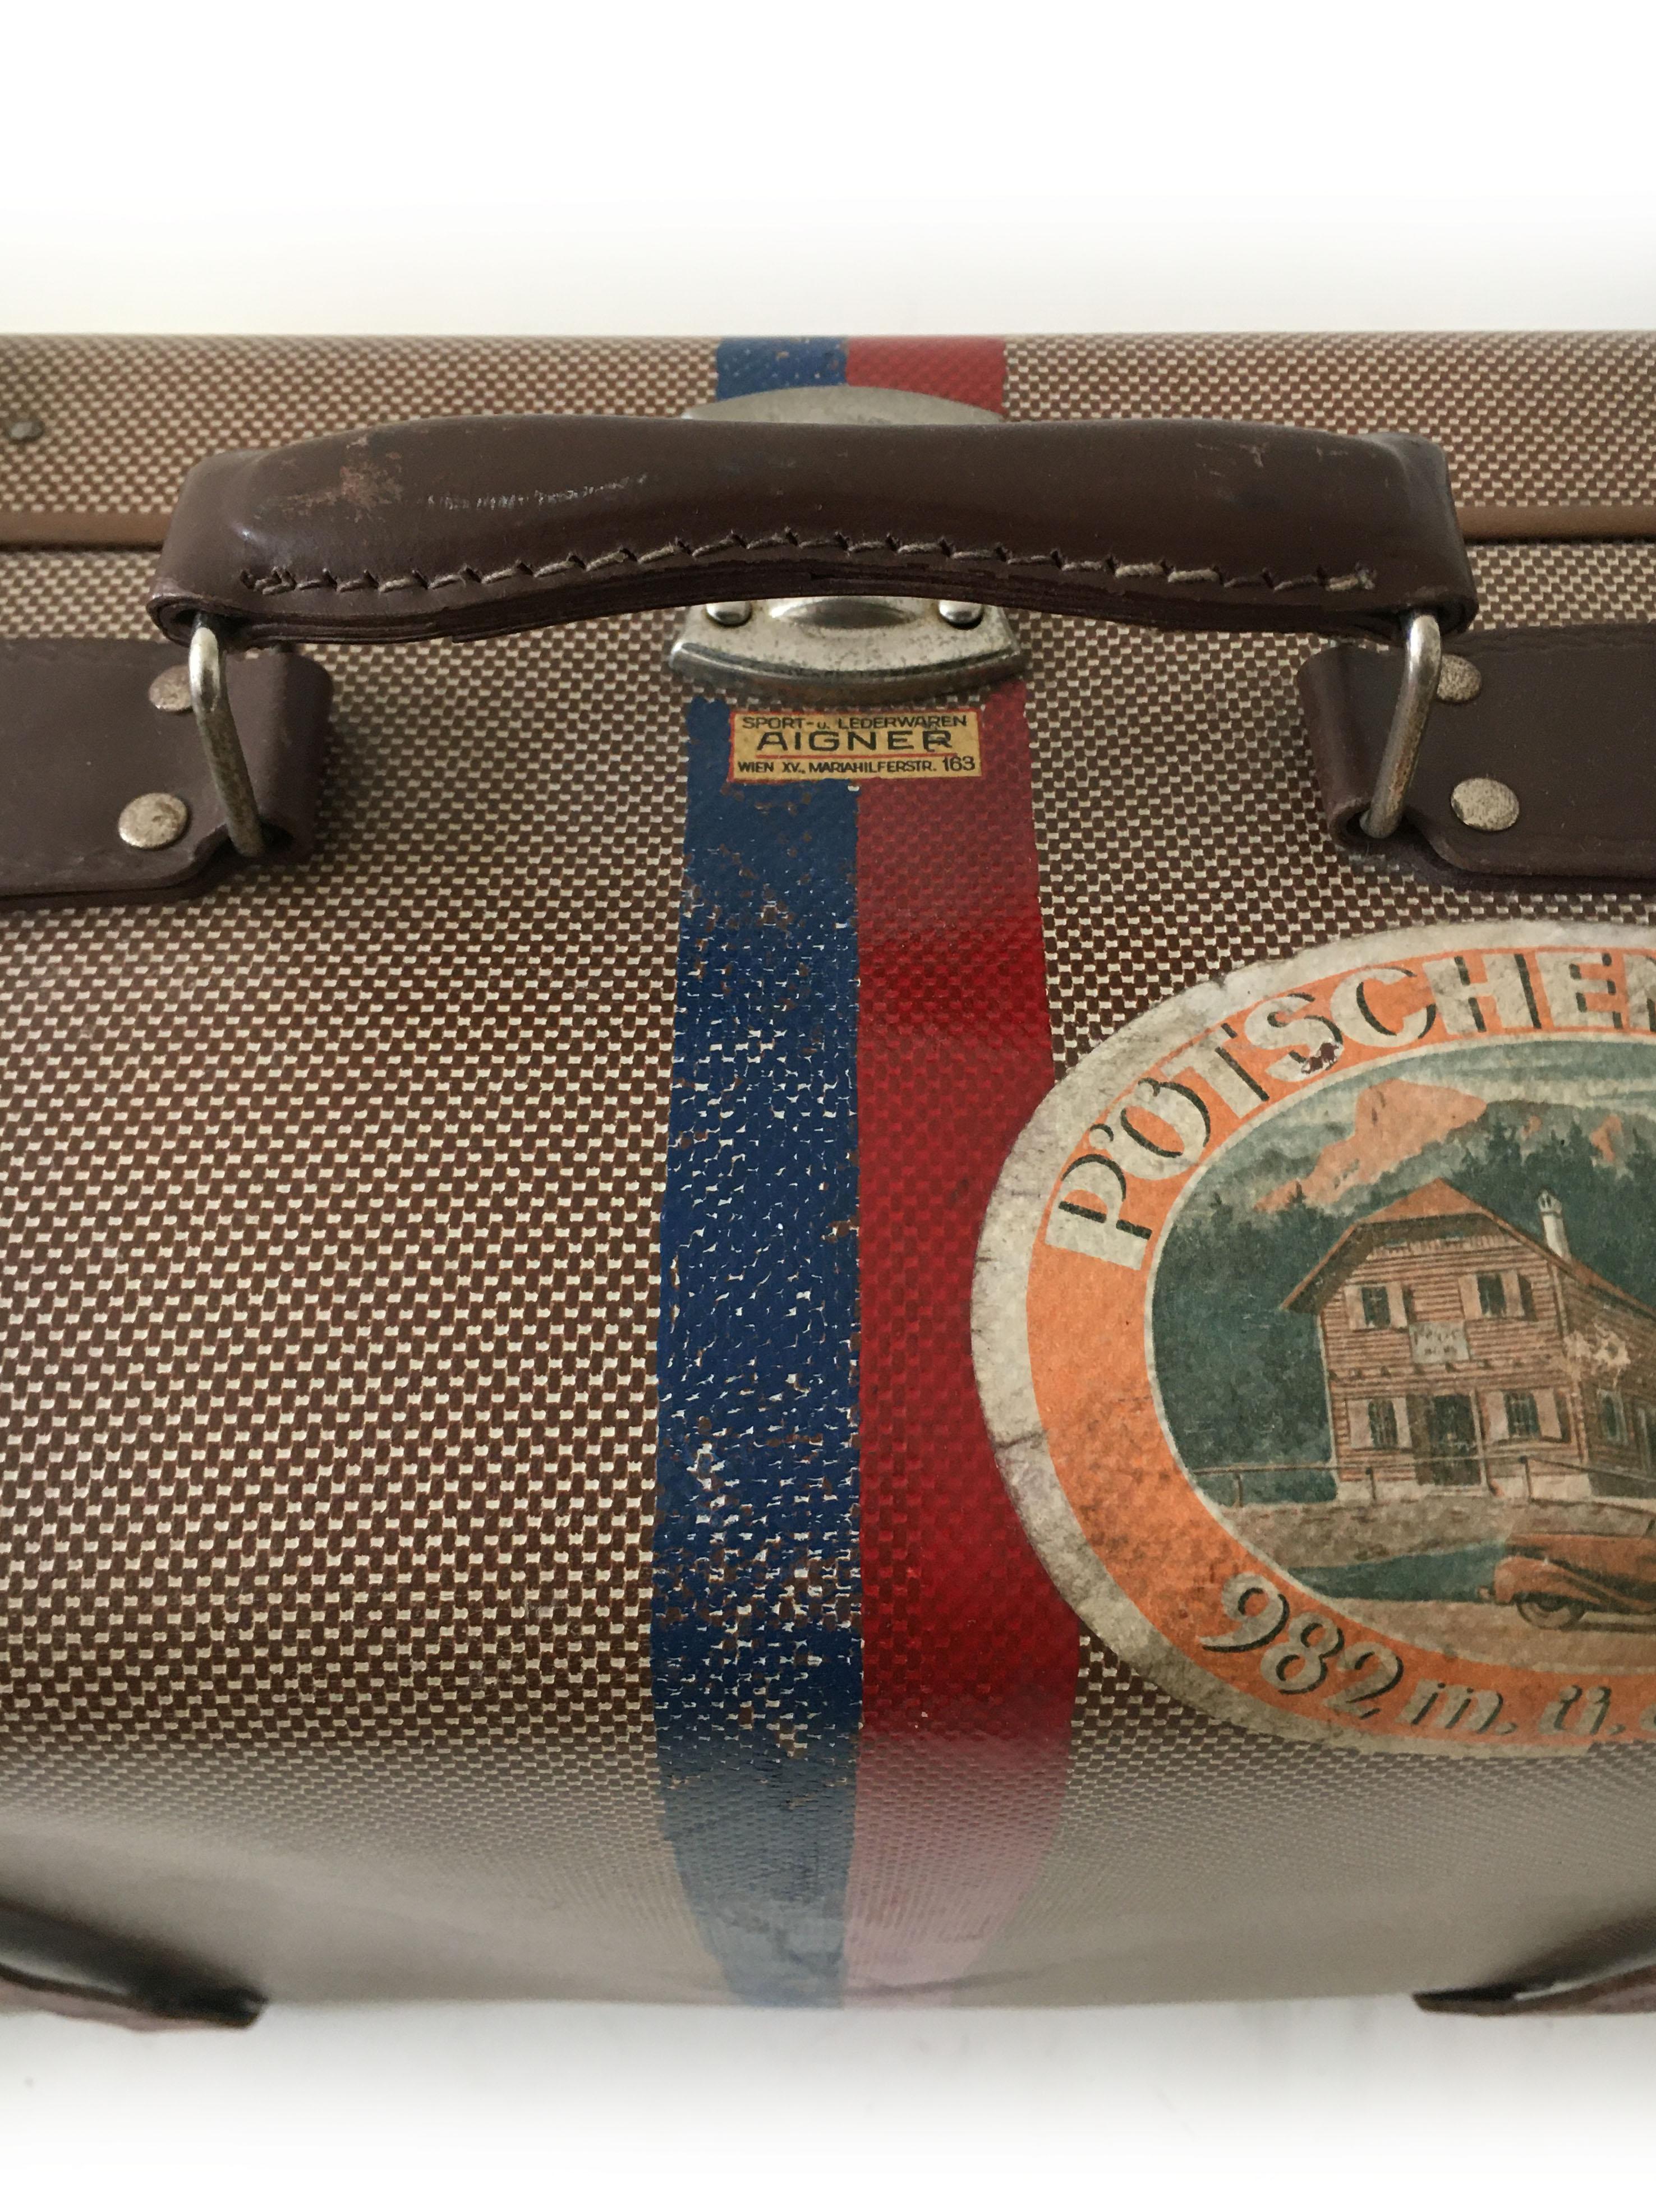 Adler Koffer Luggage with Painted Coat of Arms, Crest of Trieste, Austria 1930s 1